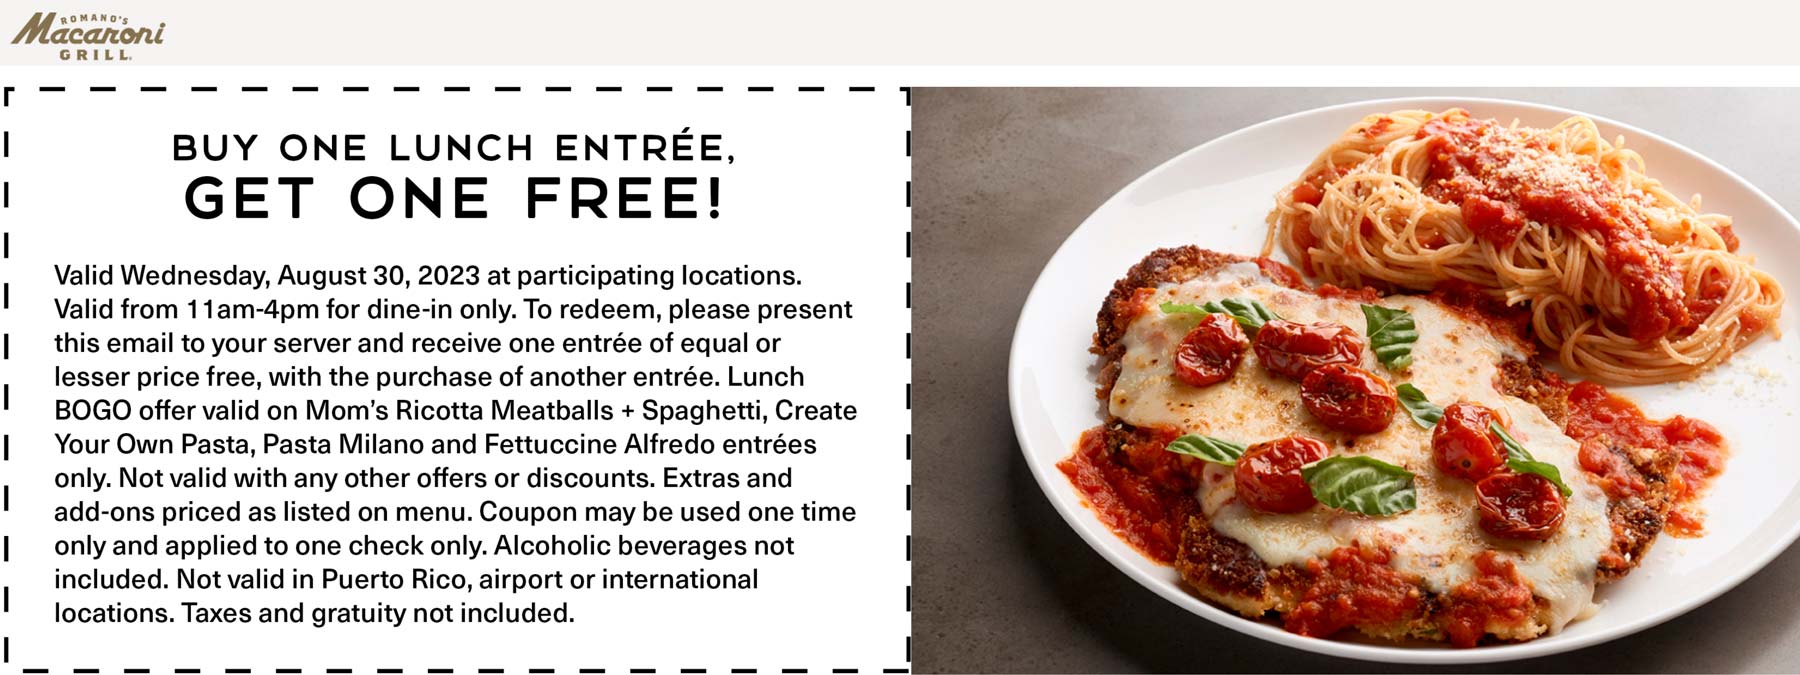 Macaroni Grill restaurants Coupon  Second lunch entree free Wednesday at Macaroni Grill #macaronigrill 